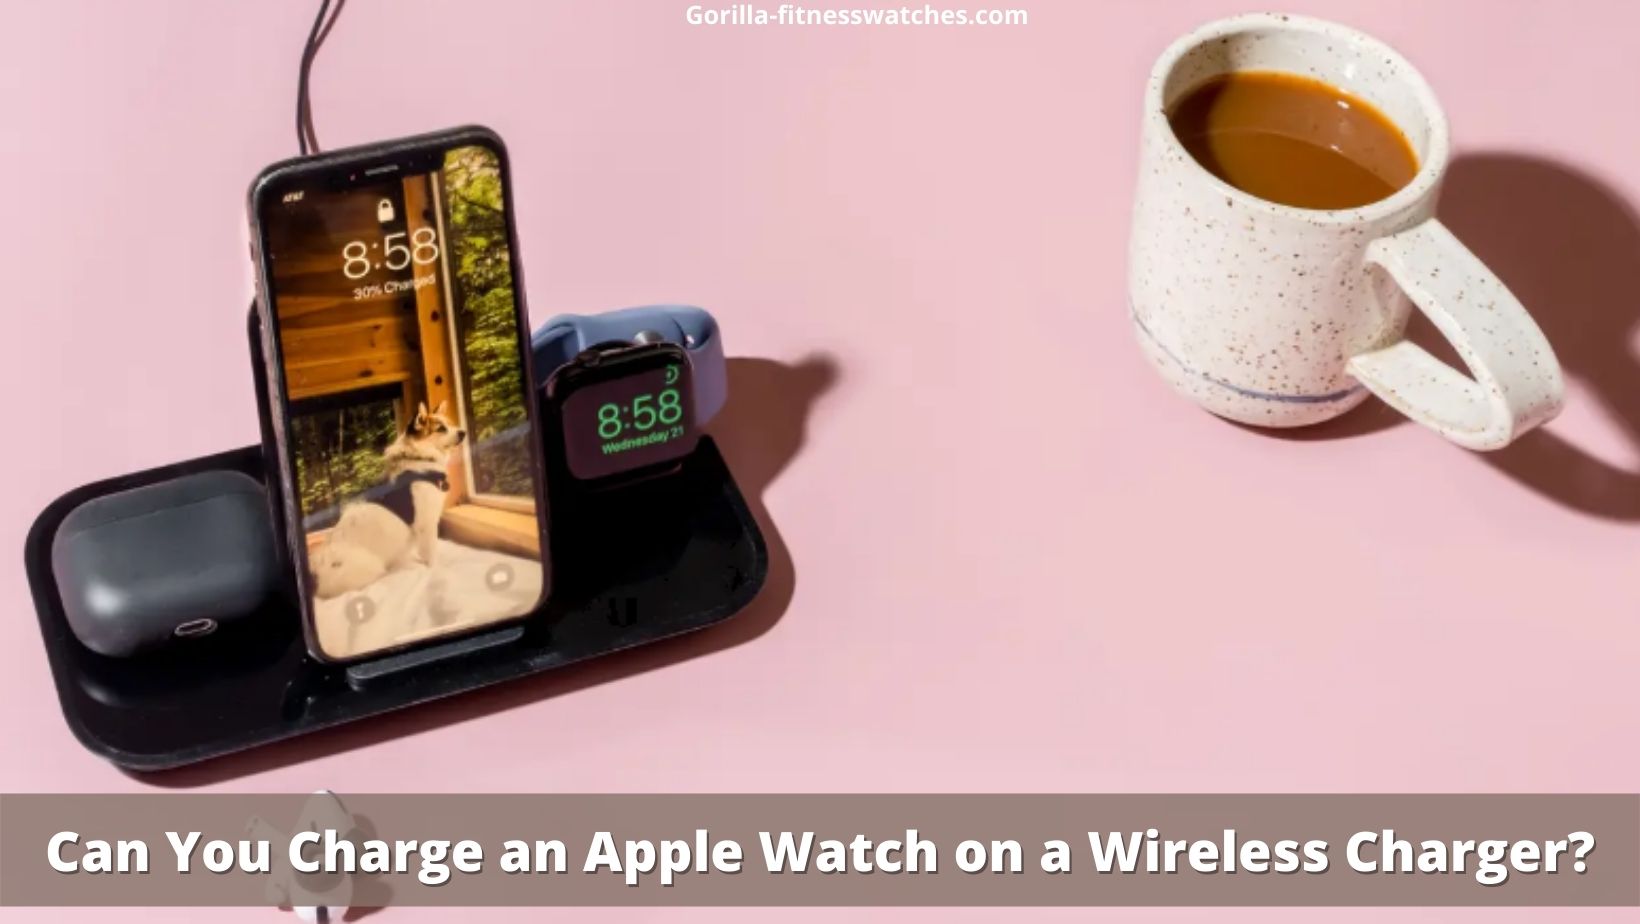 Can You Charge an Apple Watch on a Wireless Charger